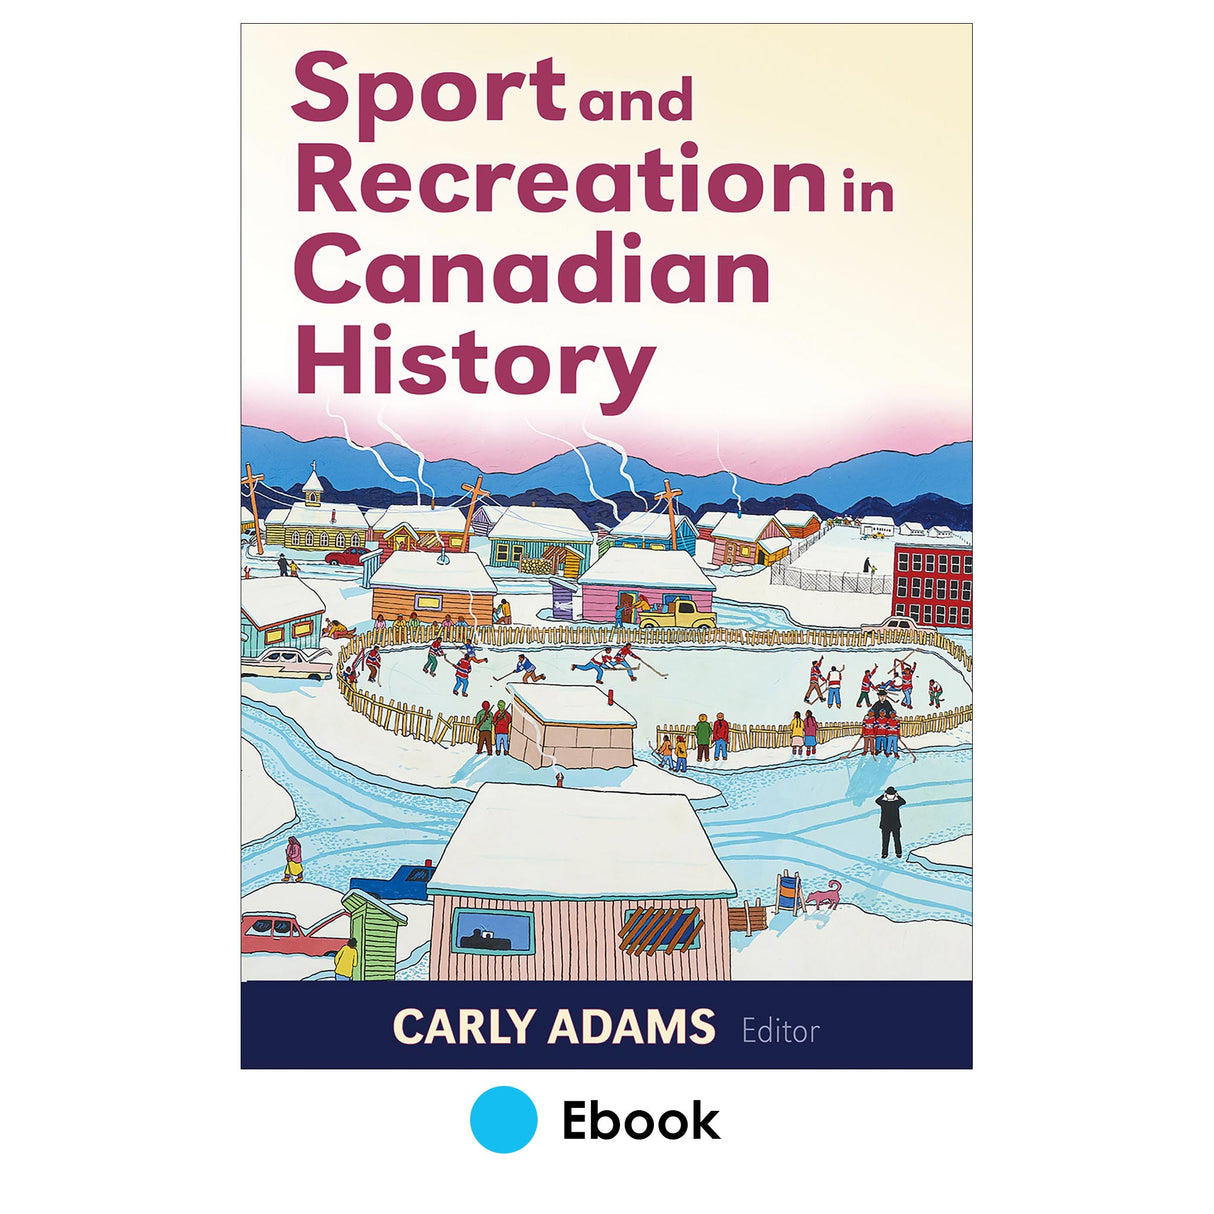 Sport and Recreation in Canadian History epub